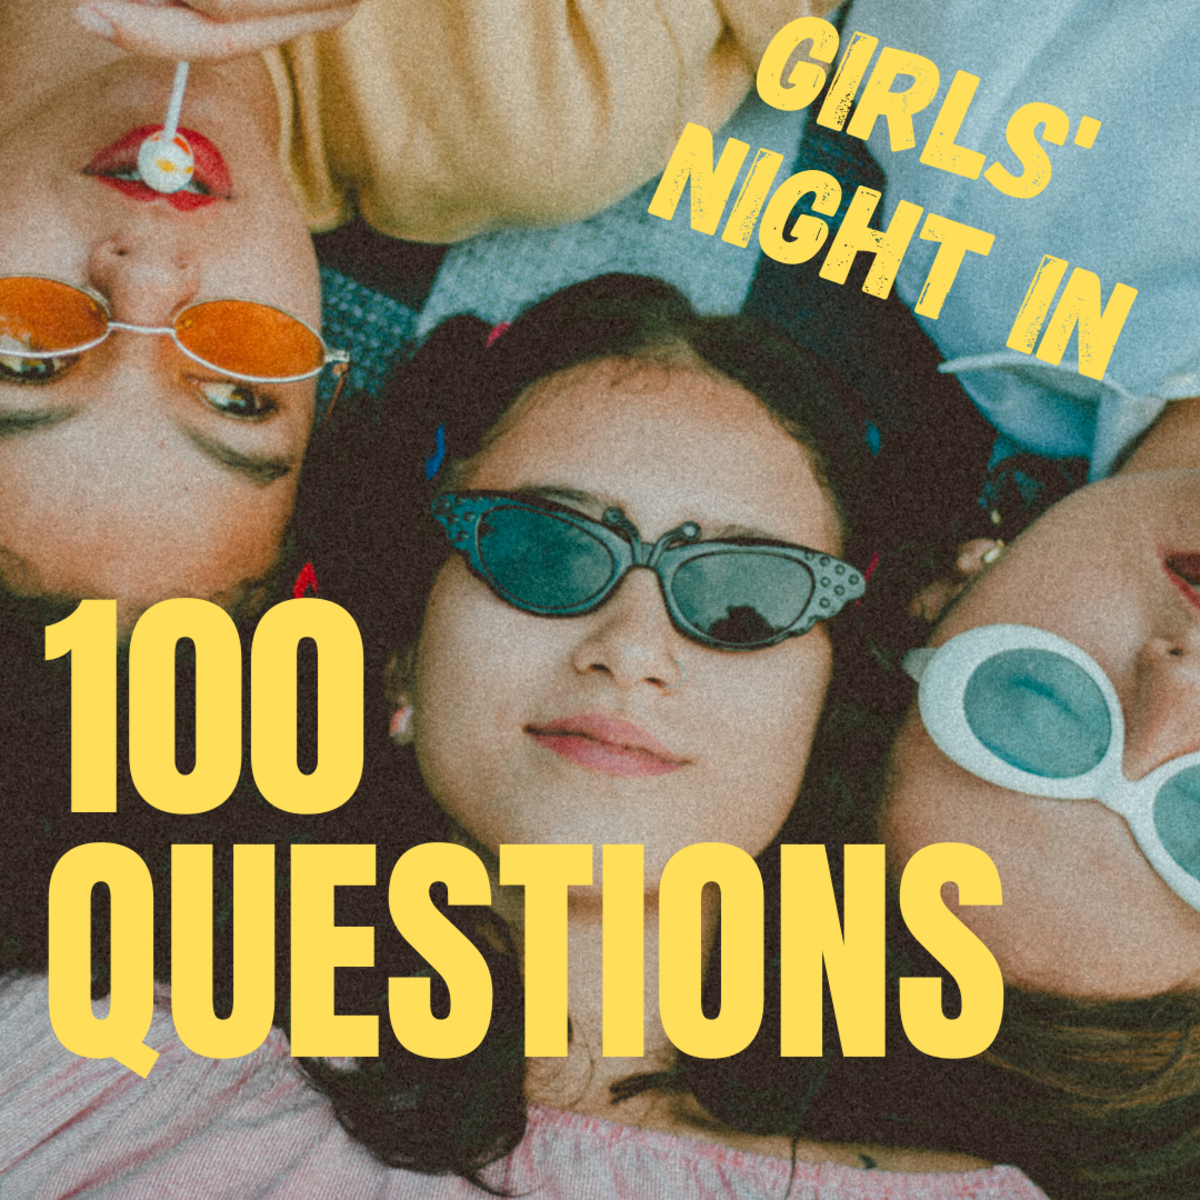 Fun Questions for Girls' Night In